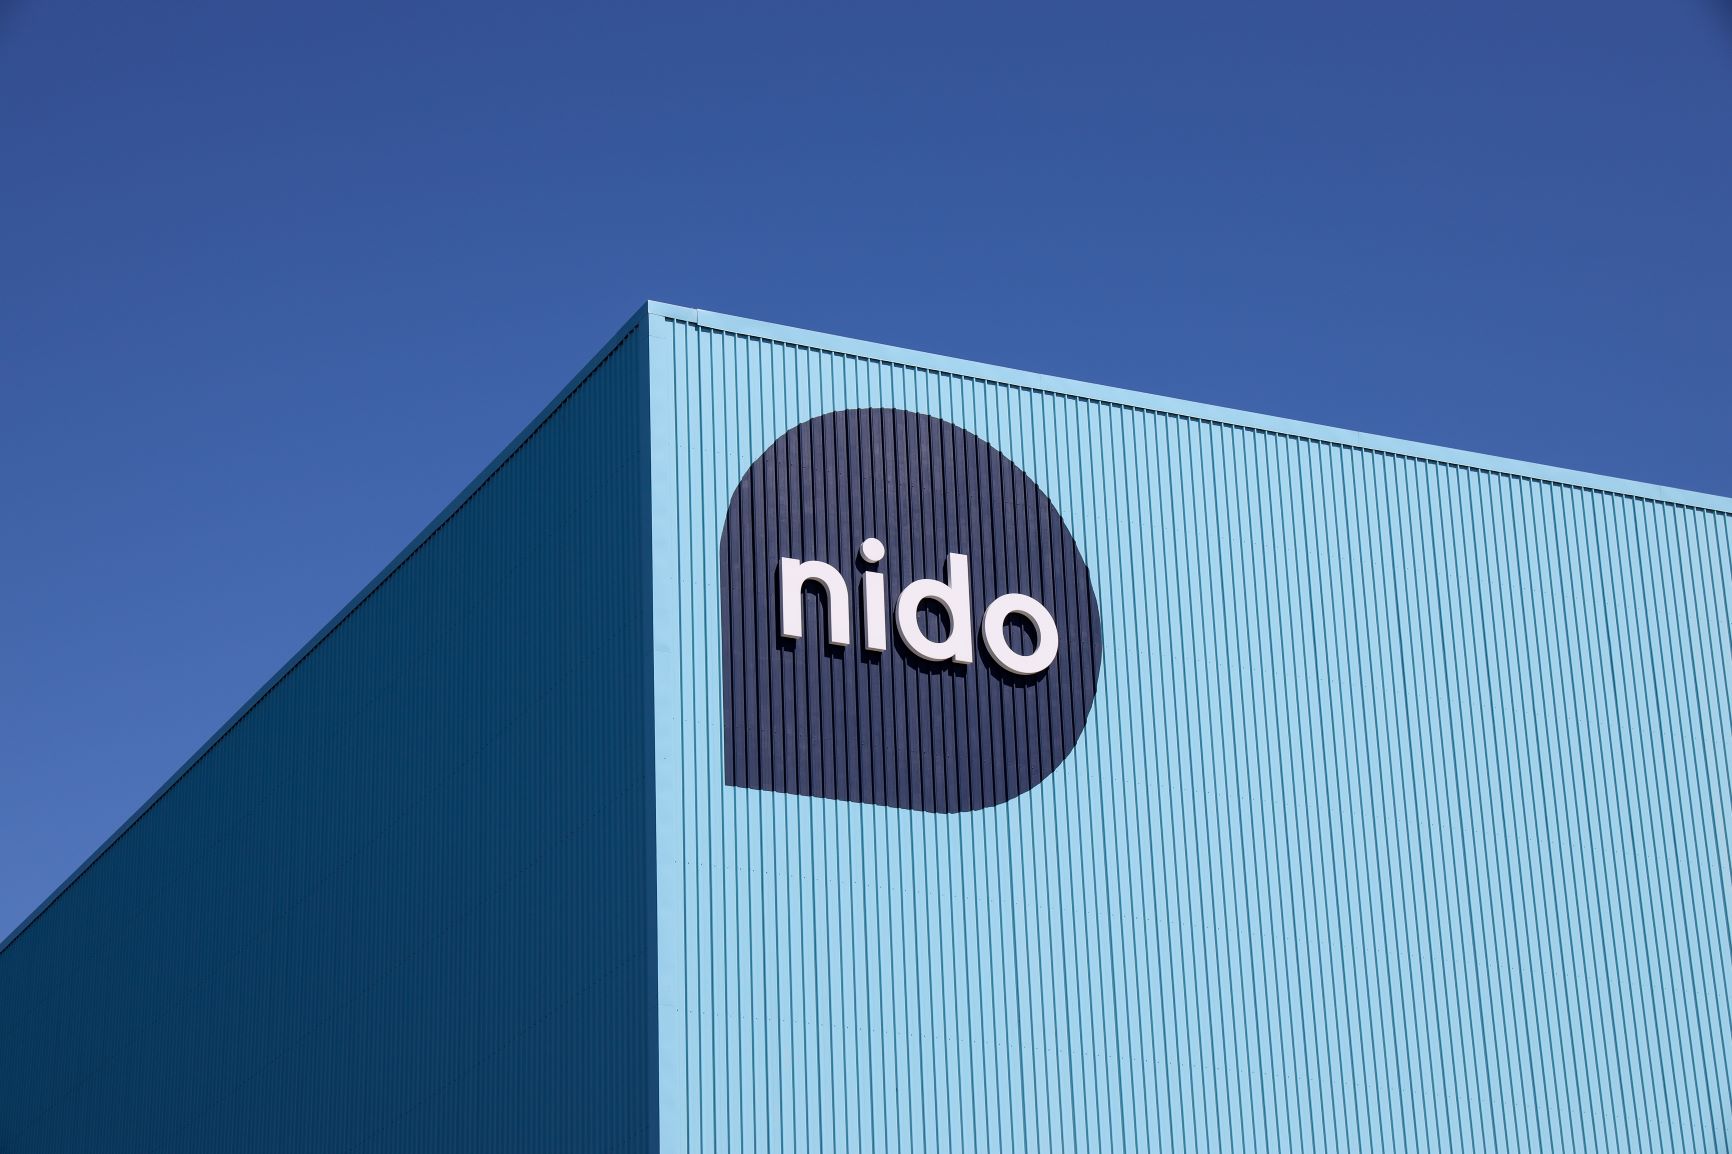 Nido enters the turmoil of the retail sector